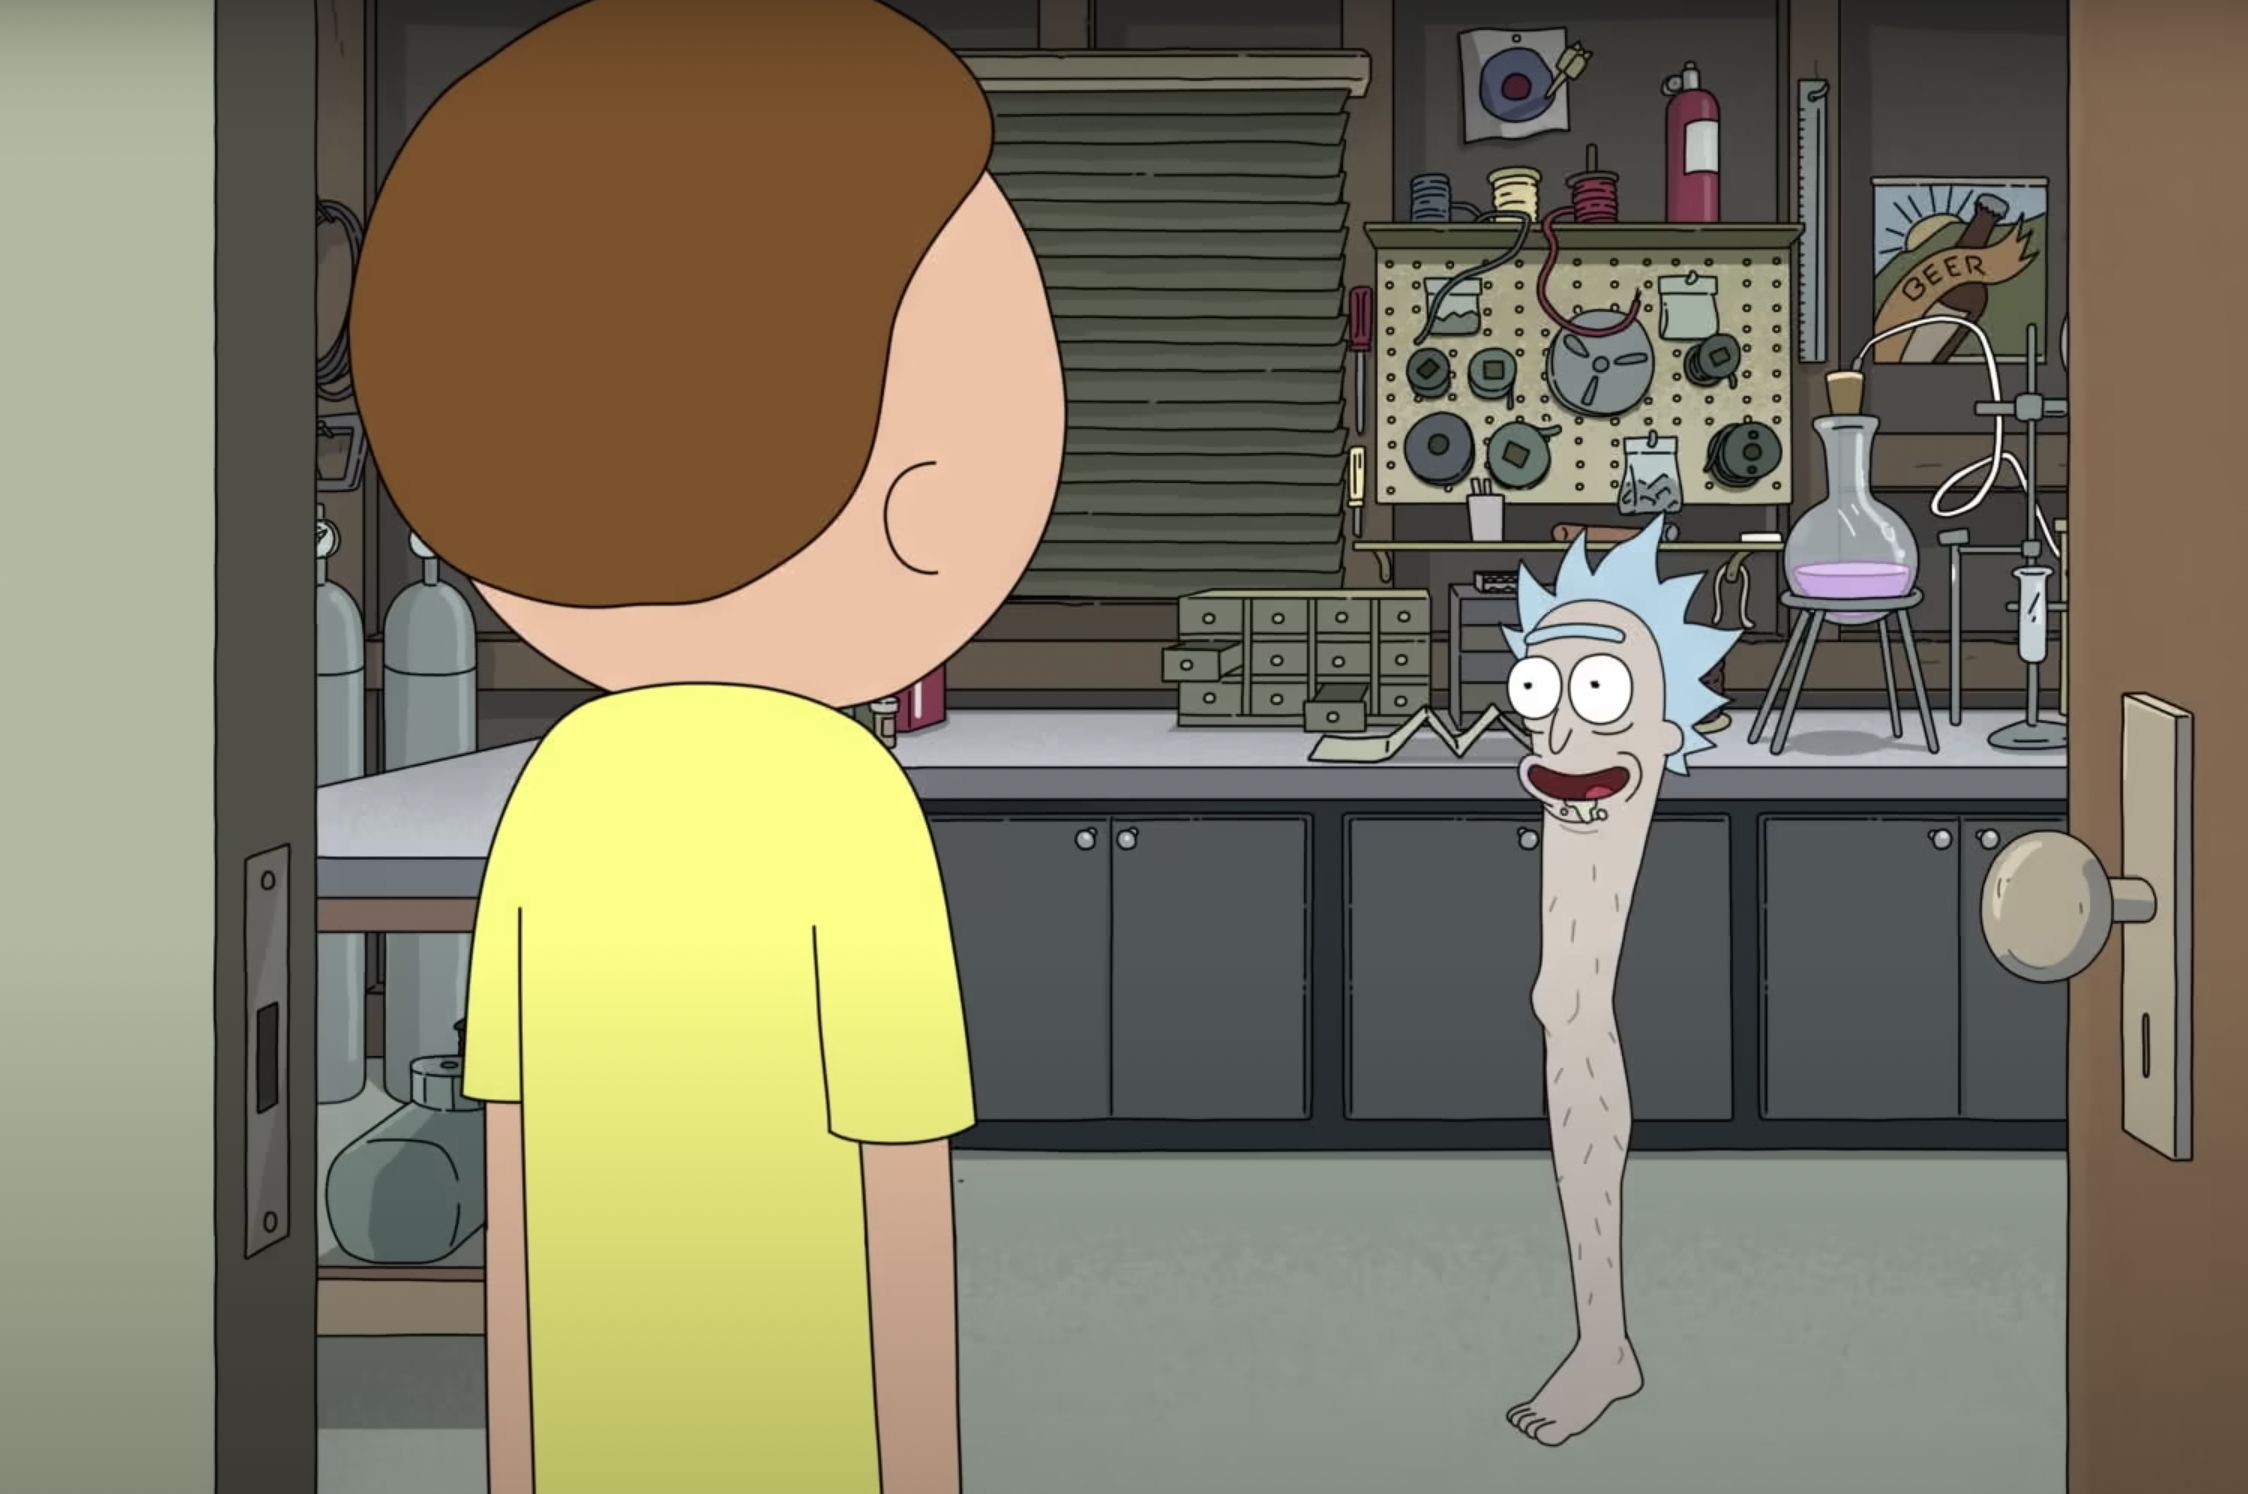 Rick and Morty Season 7 Trailer Reveals Two New Voice Actors